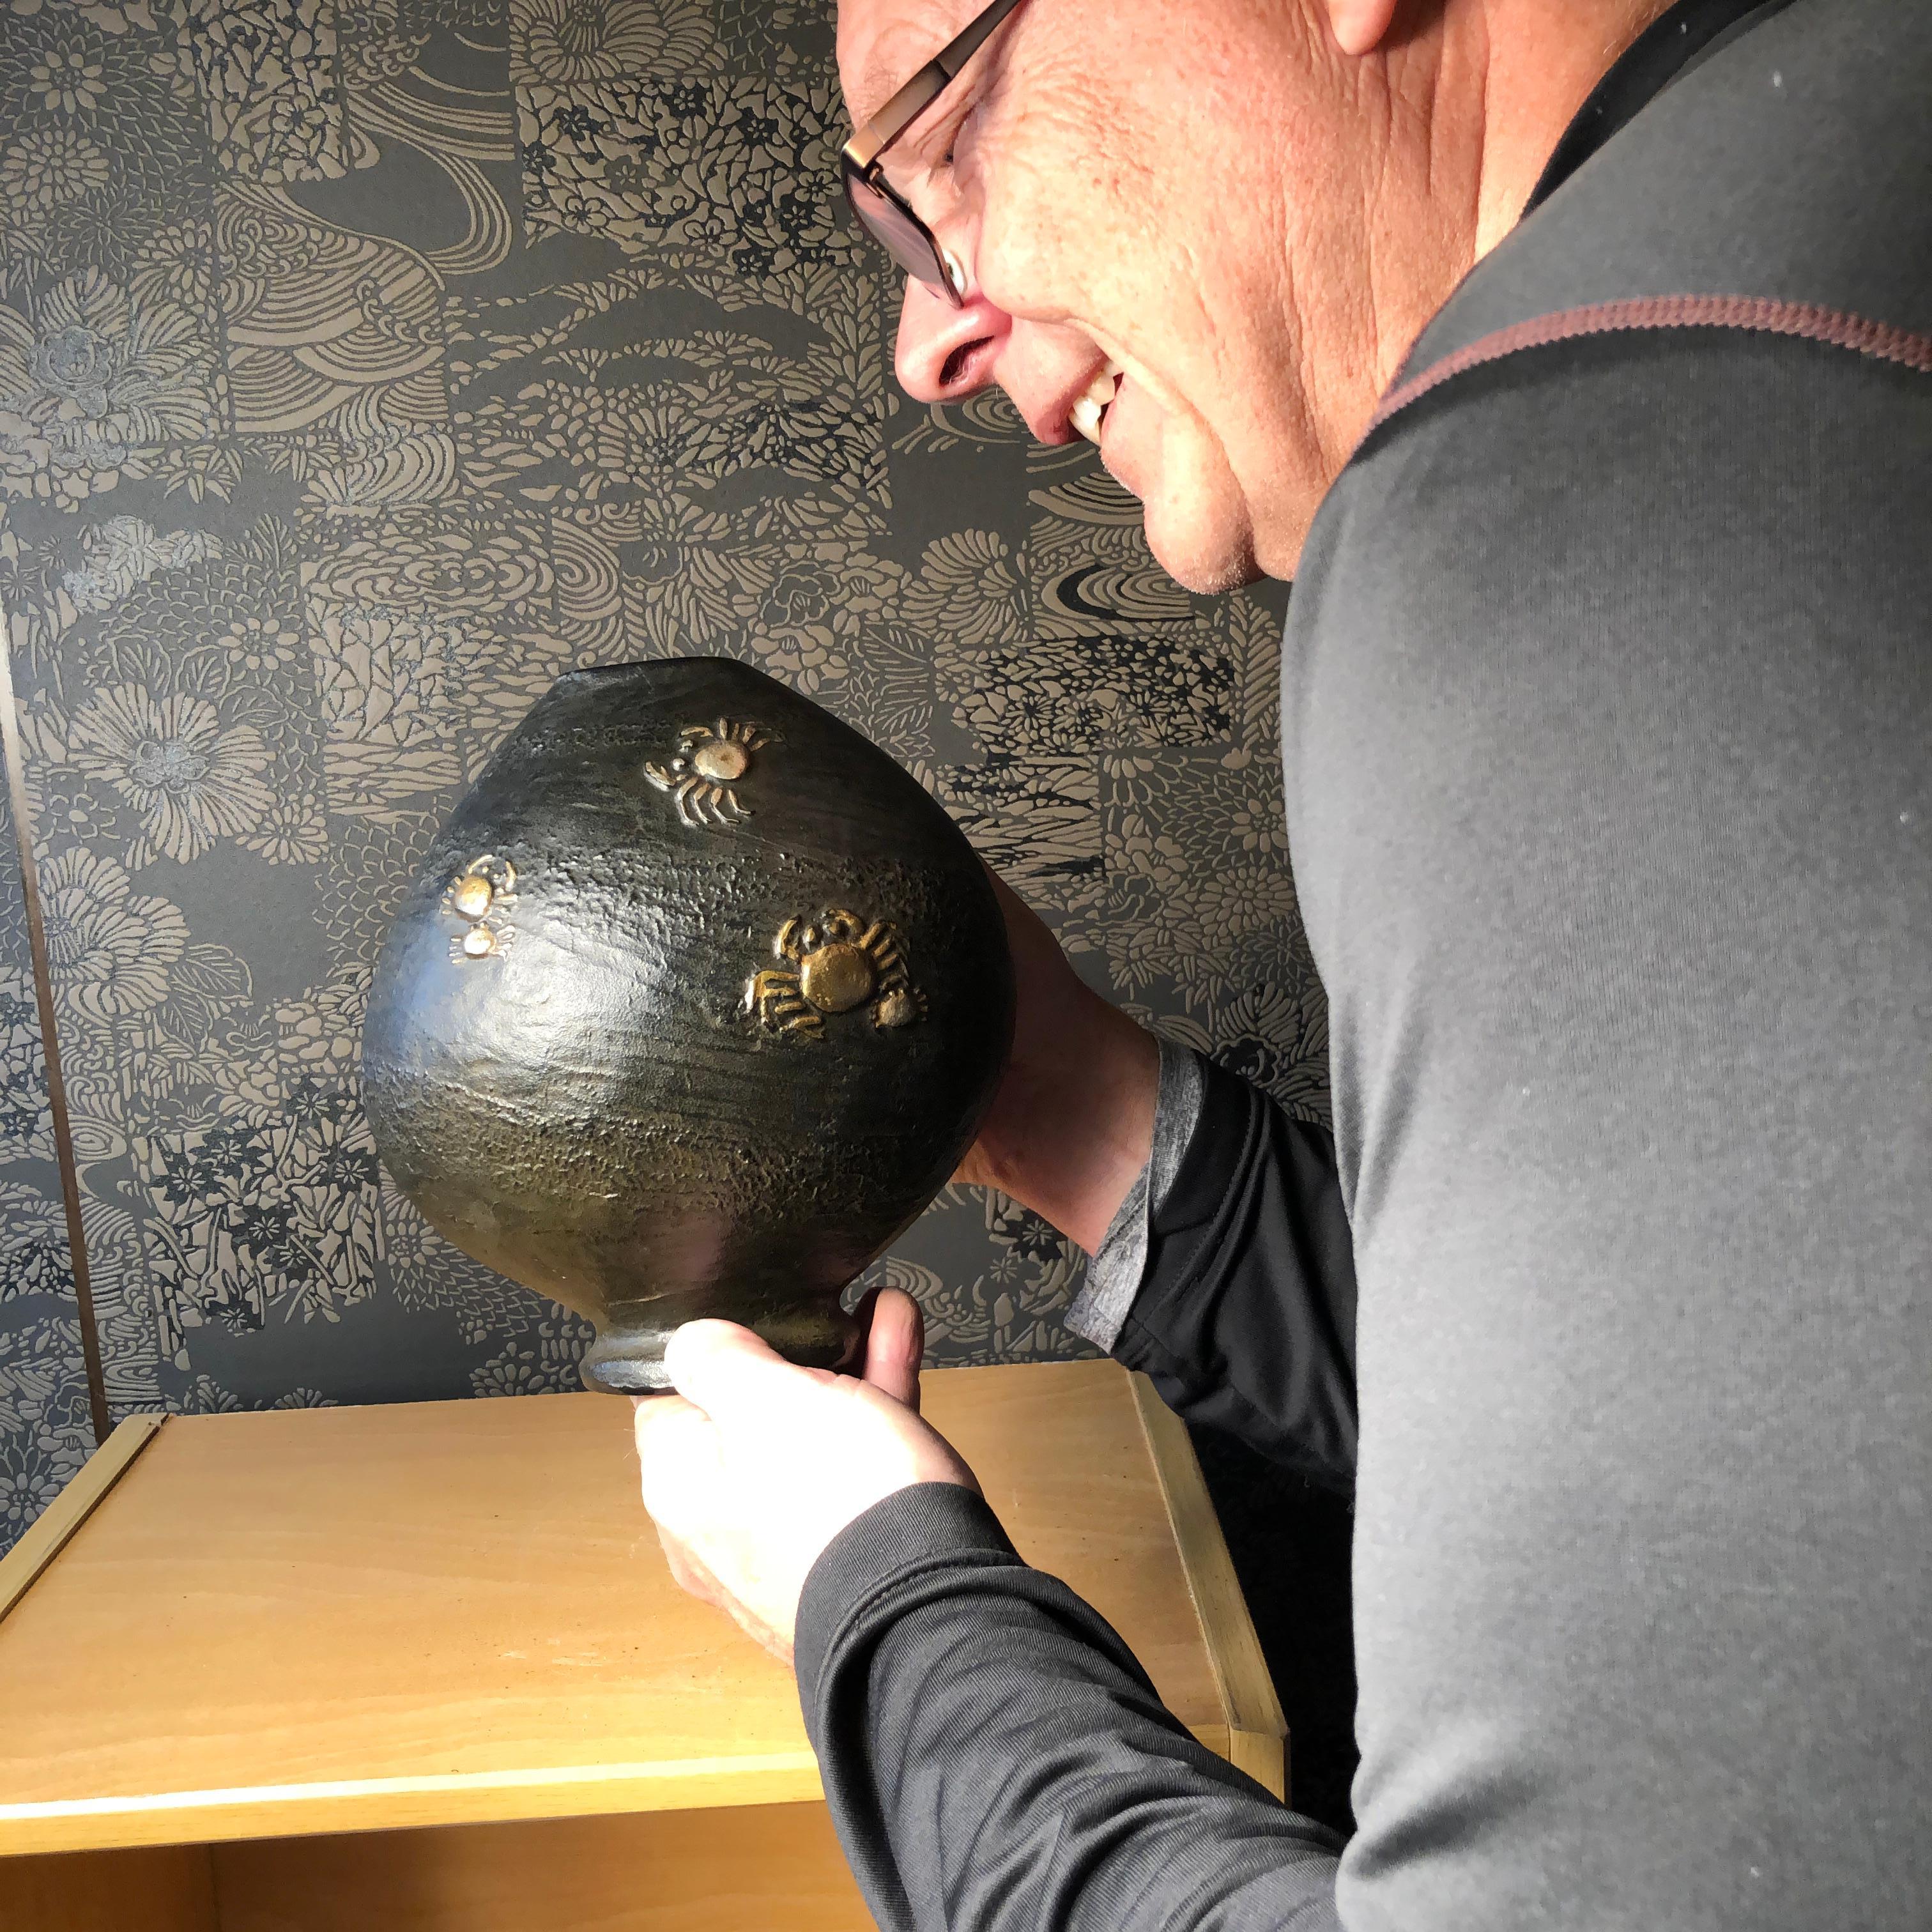 From our recent Japanese Travel Acquisitions

Mint and boxed

A fine tall ovoid form Japanese hand cast bronze nautical vase highlighted in silver and gold with a school of fish on one side and scurrying crabs on the other- all creatures seeming